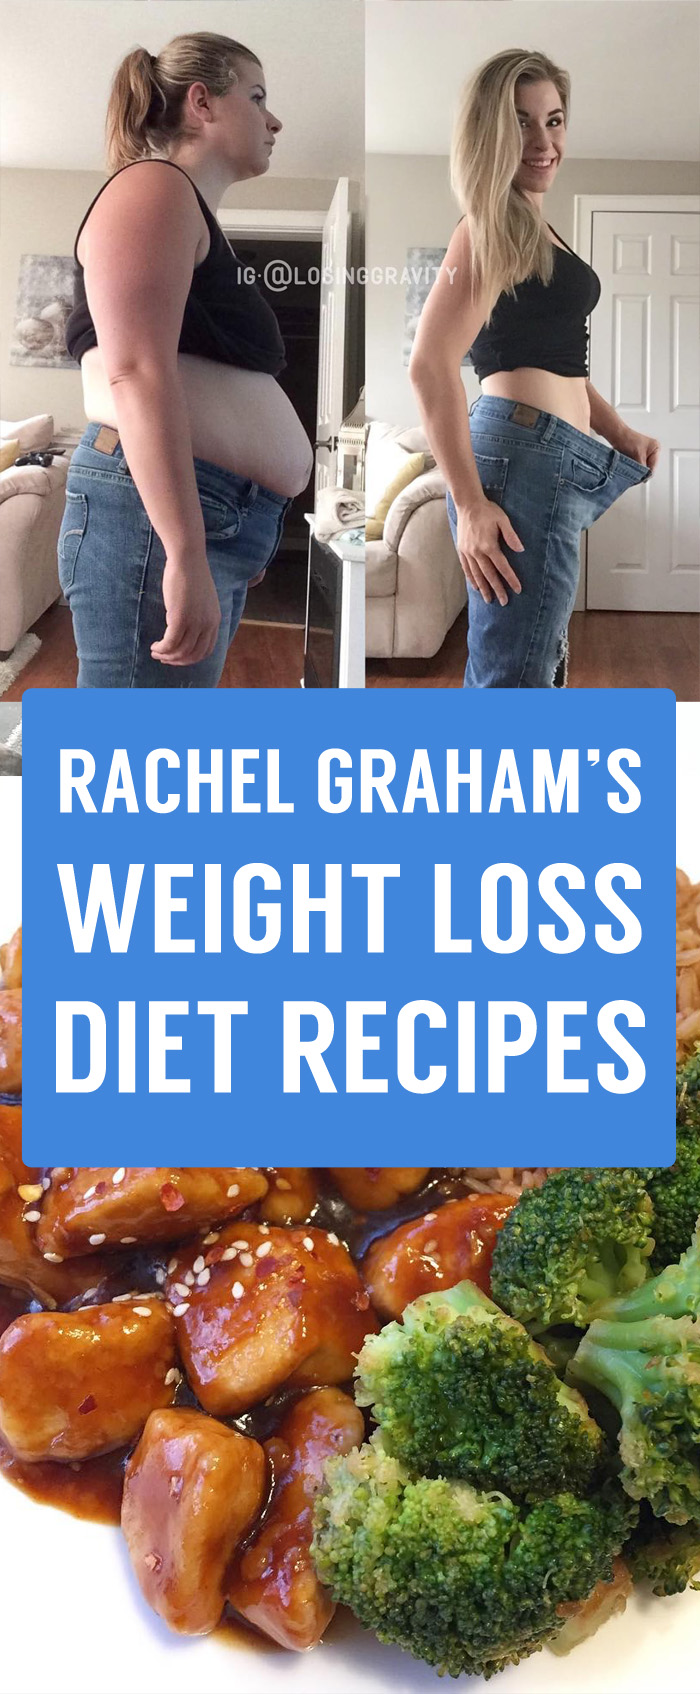 Rachel Graham’s Favourite Weight Loss Meal Recipes From